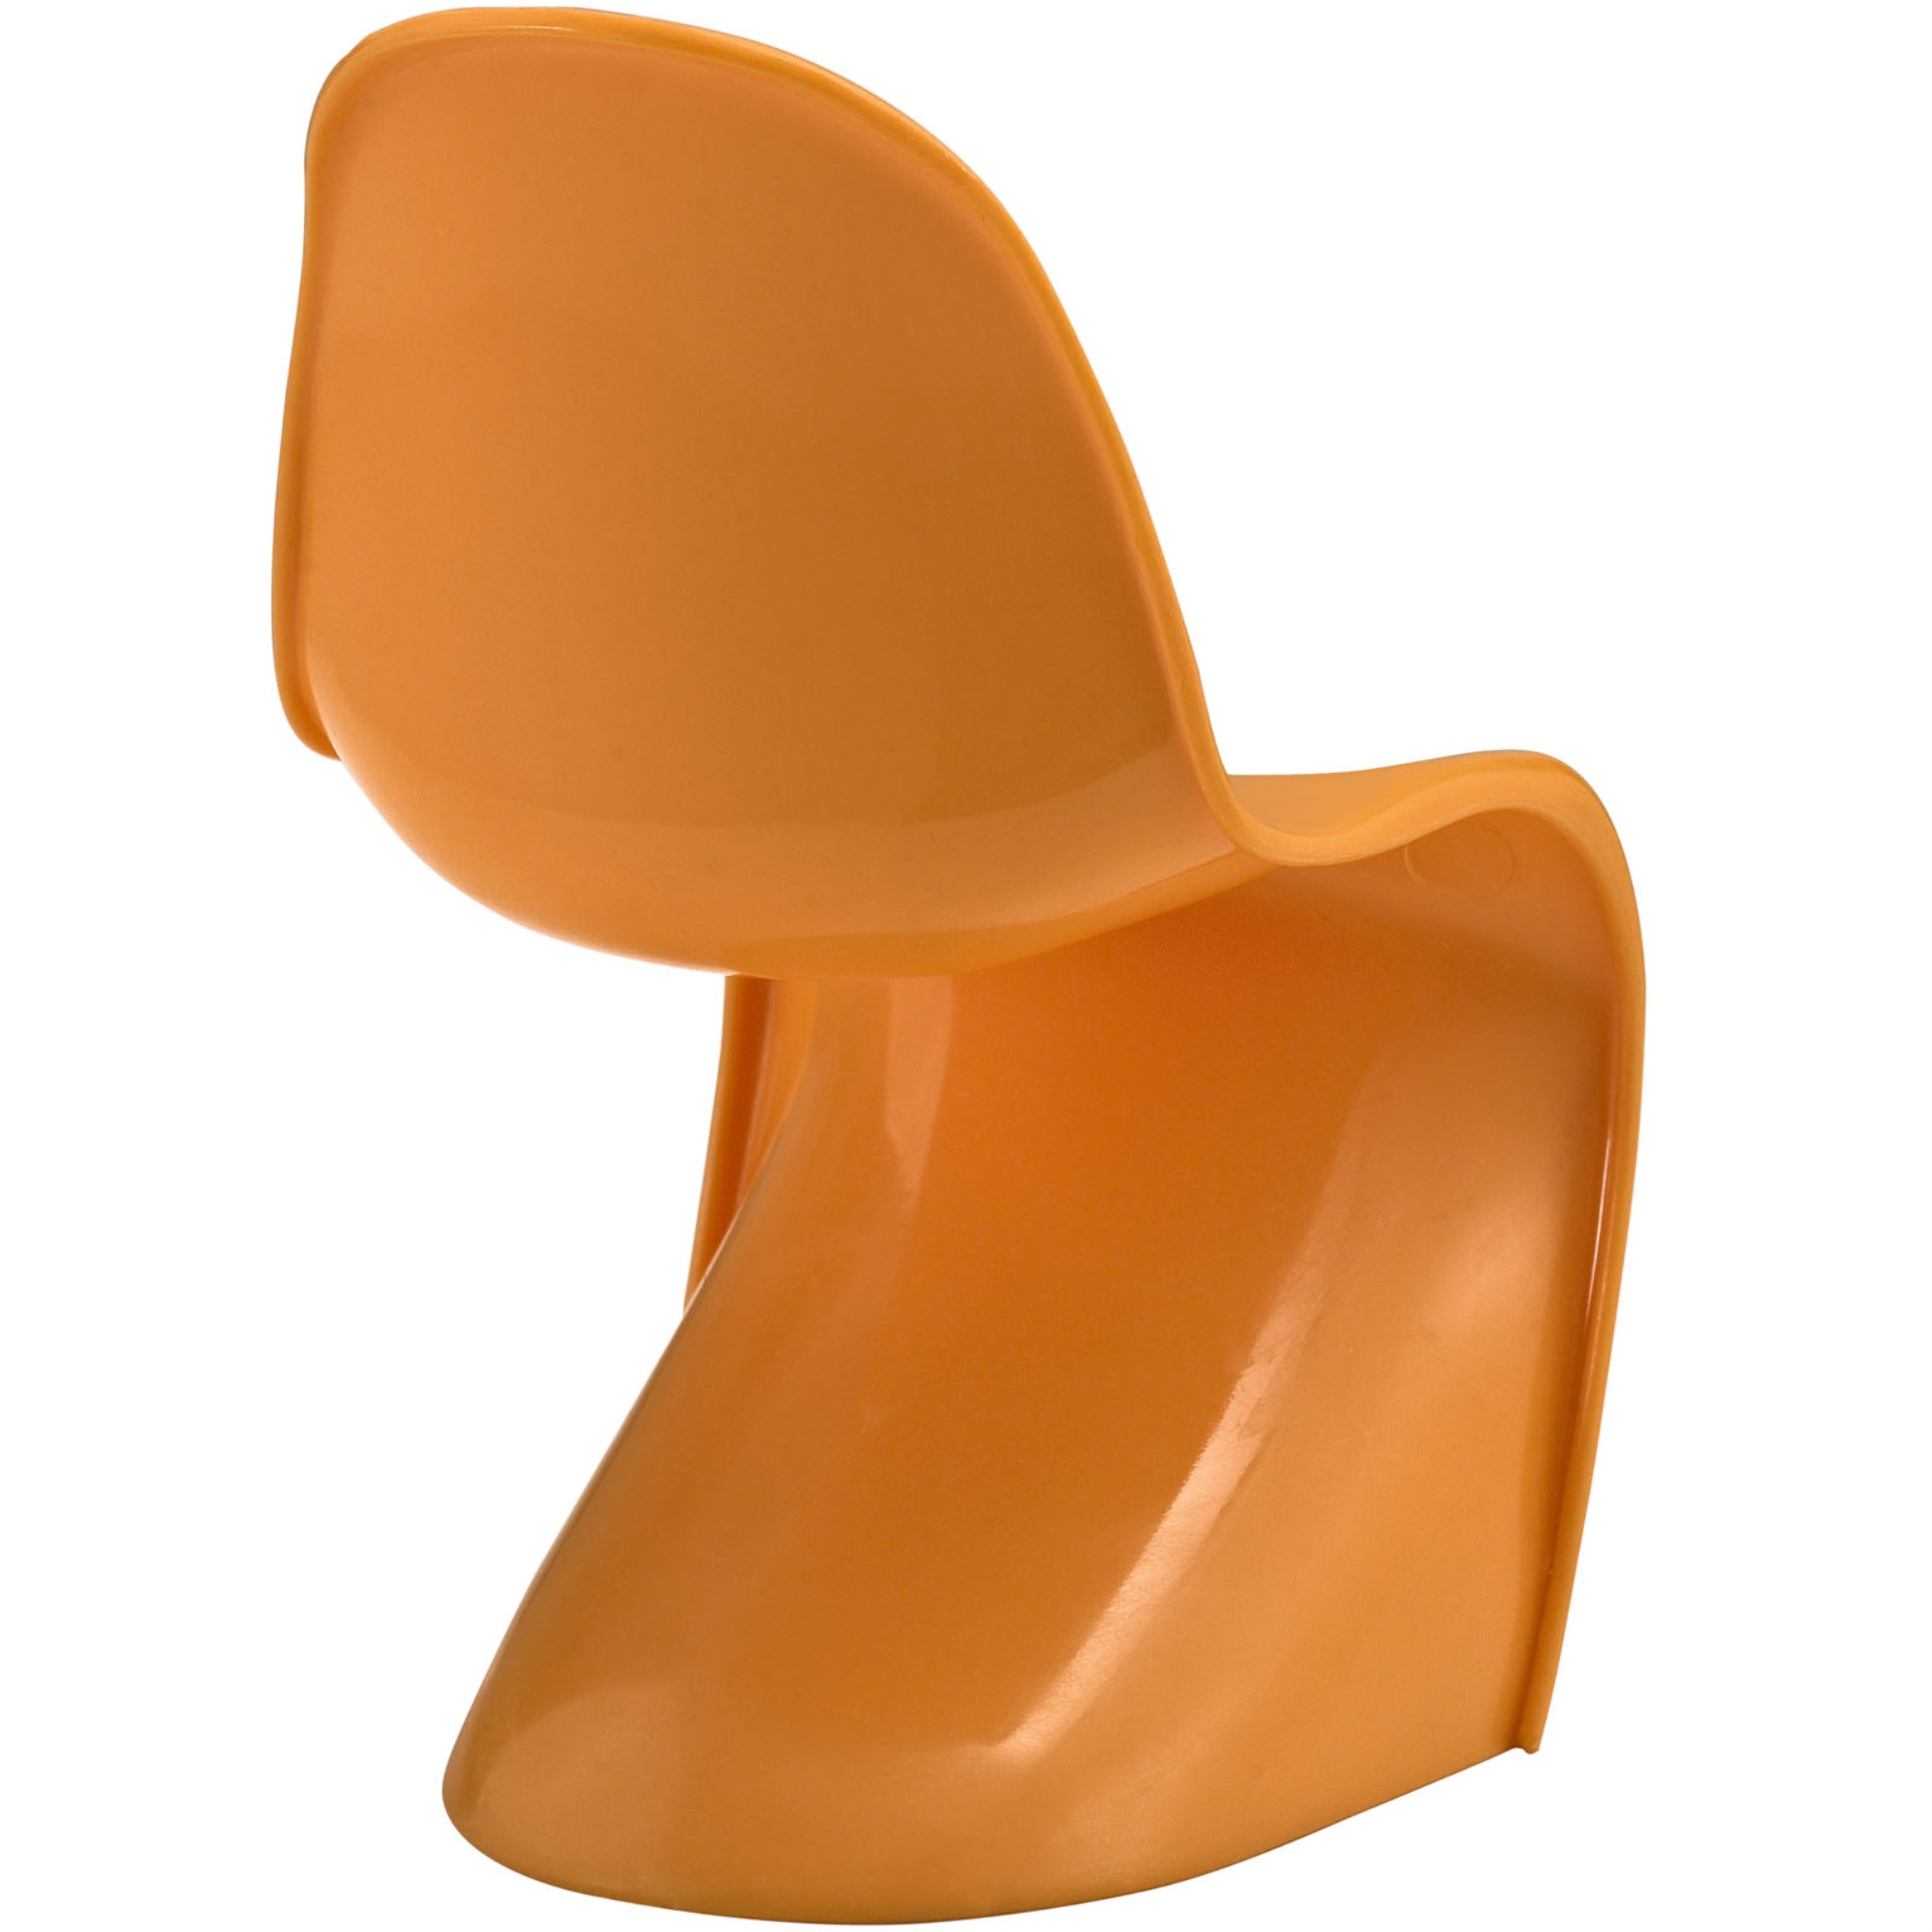 Novelty Chair in Orange - image 3 of 3